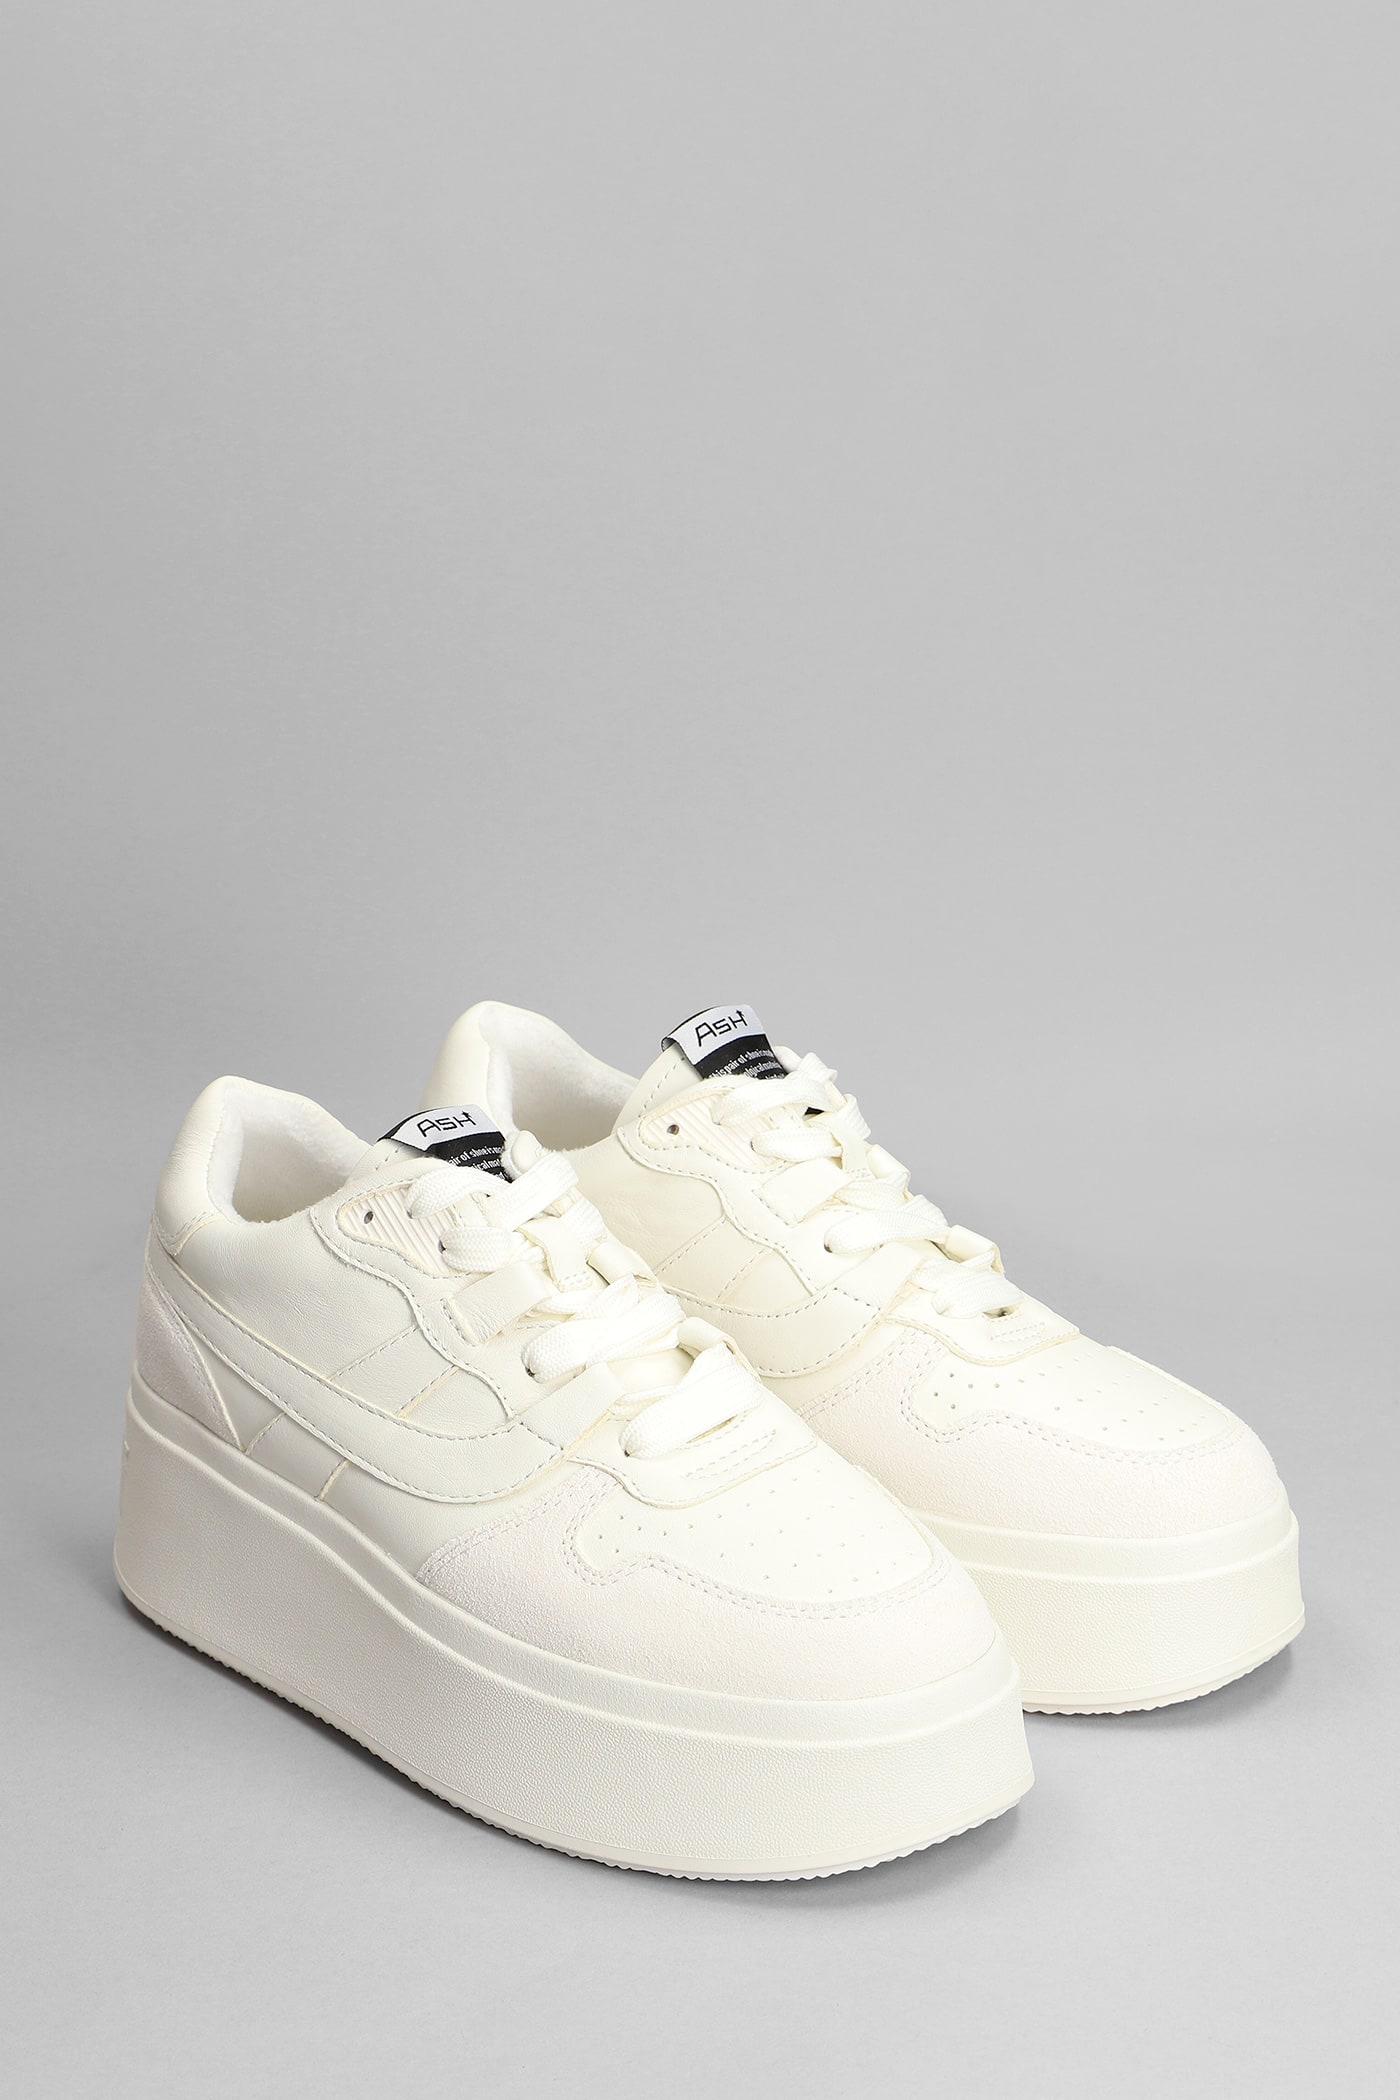 Ash Match Sneakers In White Suede And Leather | Lyst